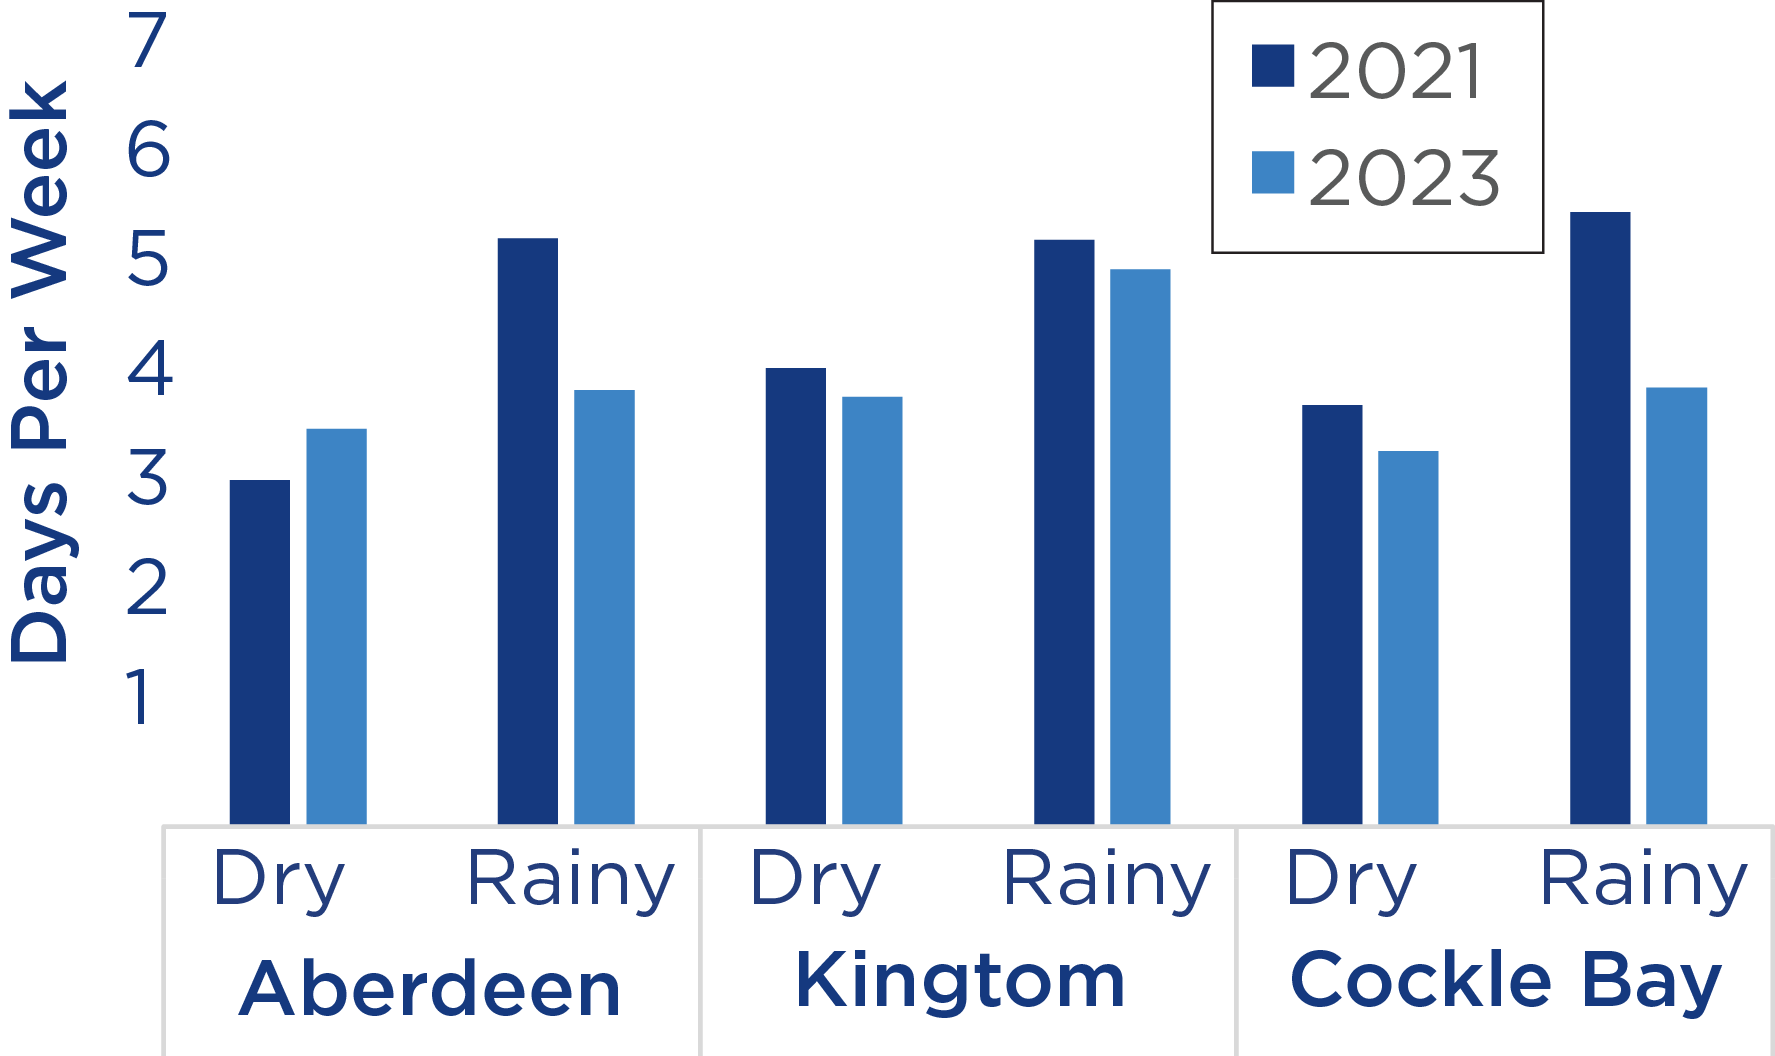 Piped water supply decreased during the rainy season and remained unchanged during the dry season.